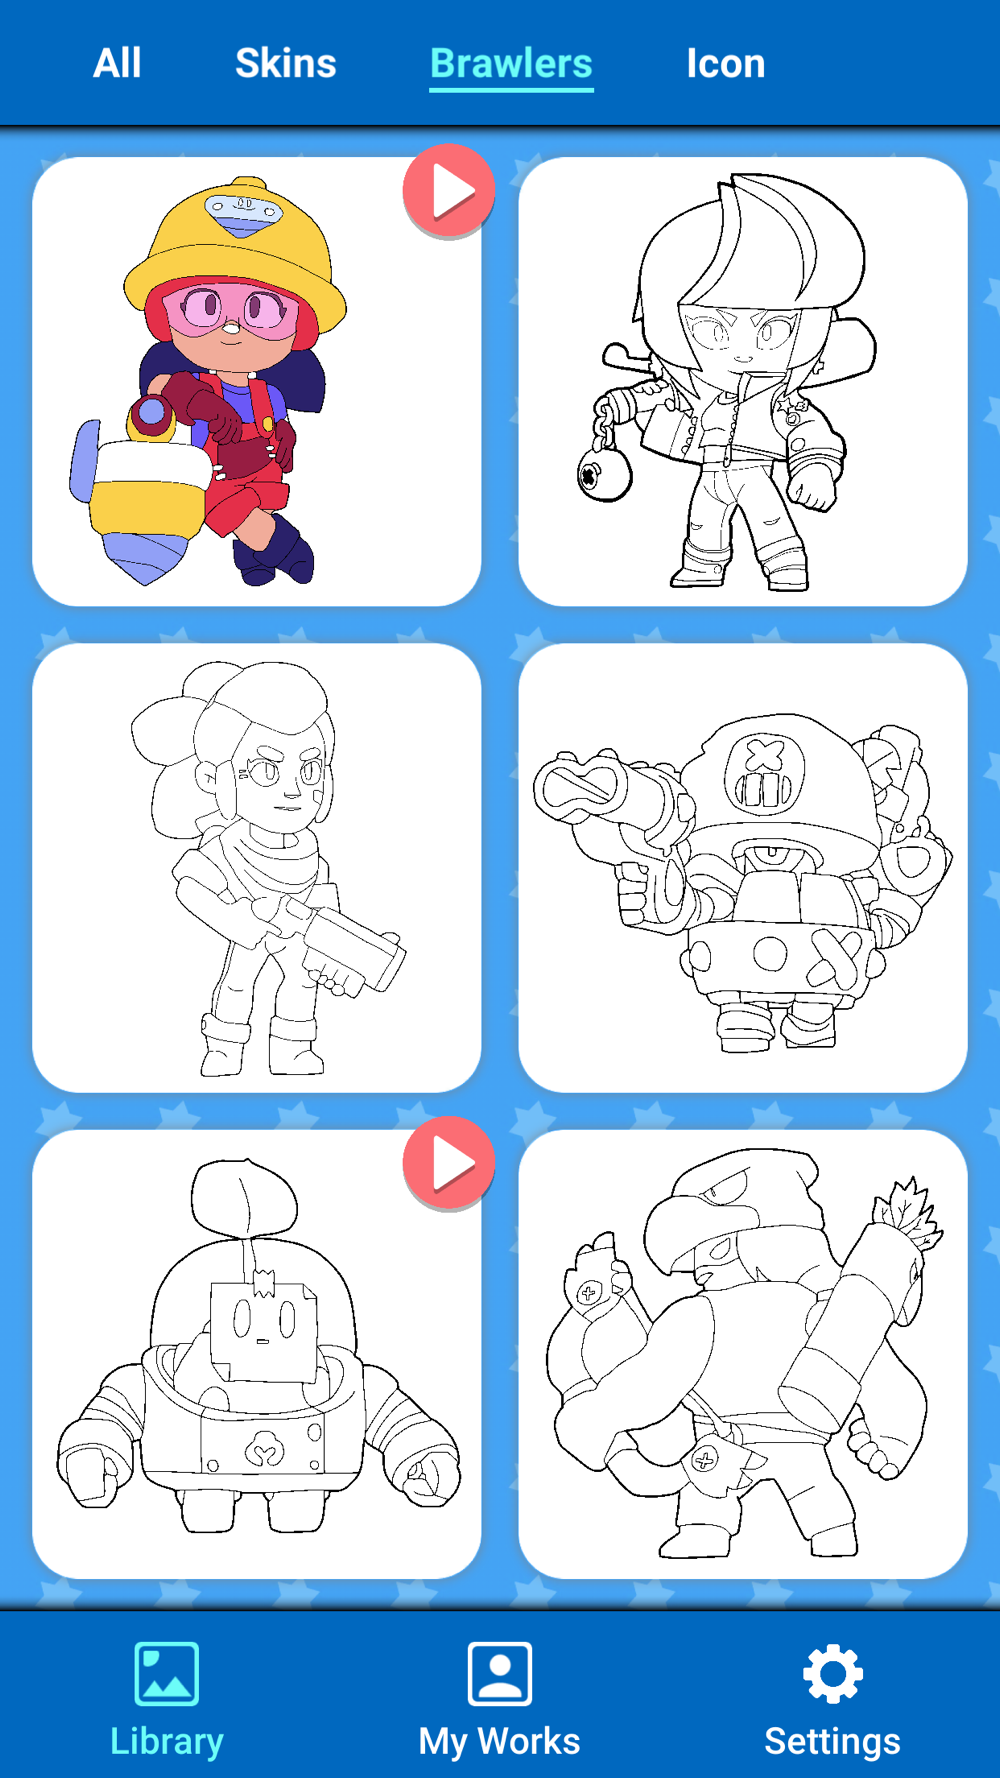 Coloring Pages For Brawl Stars Free Download App For Iphone Steprimo Com - brawl stars skins coloring pages